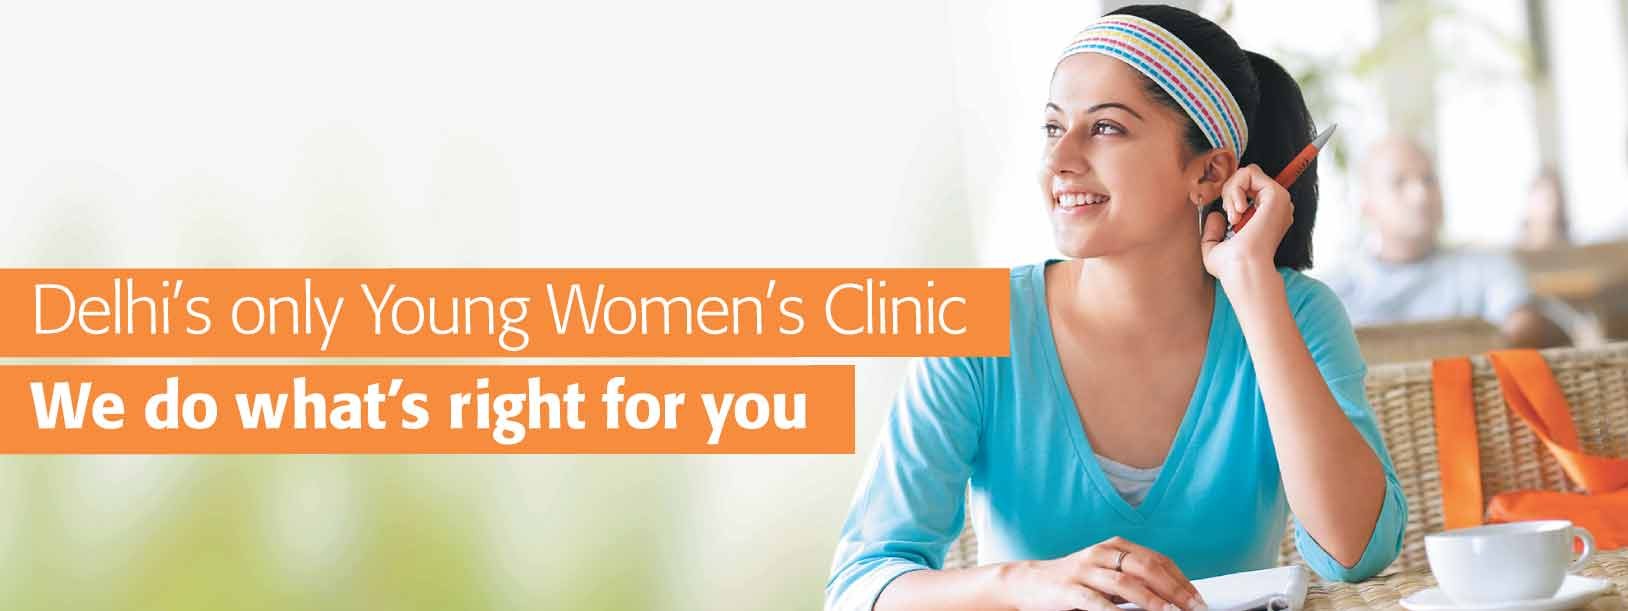 Delhi's only Young Women's Clinic